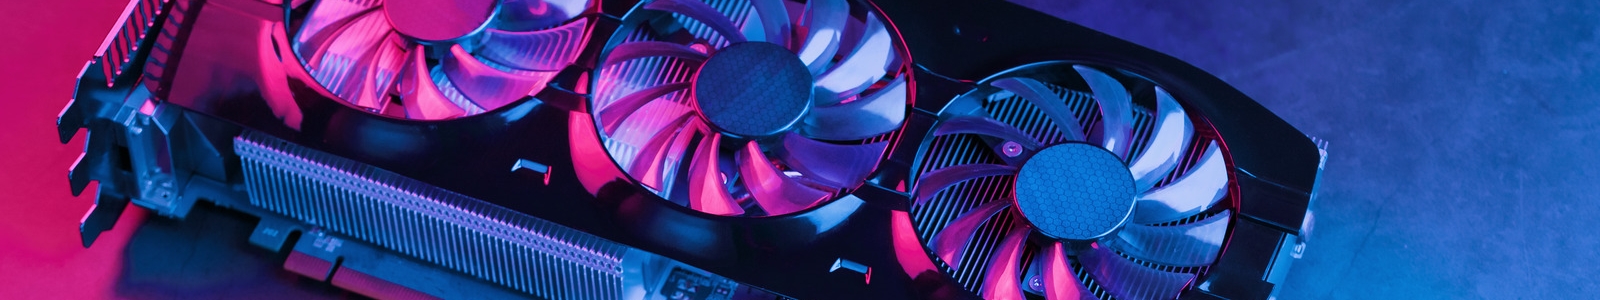 Large,And,Powerful,Graphics,Card,With,Three,Fans,With,Blue